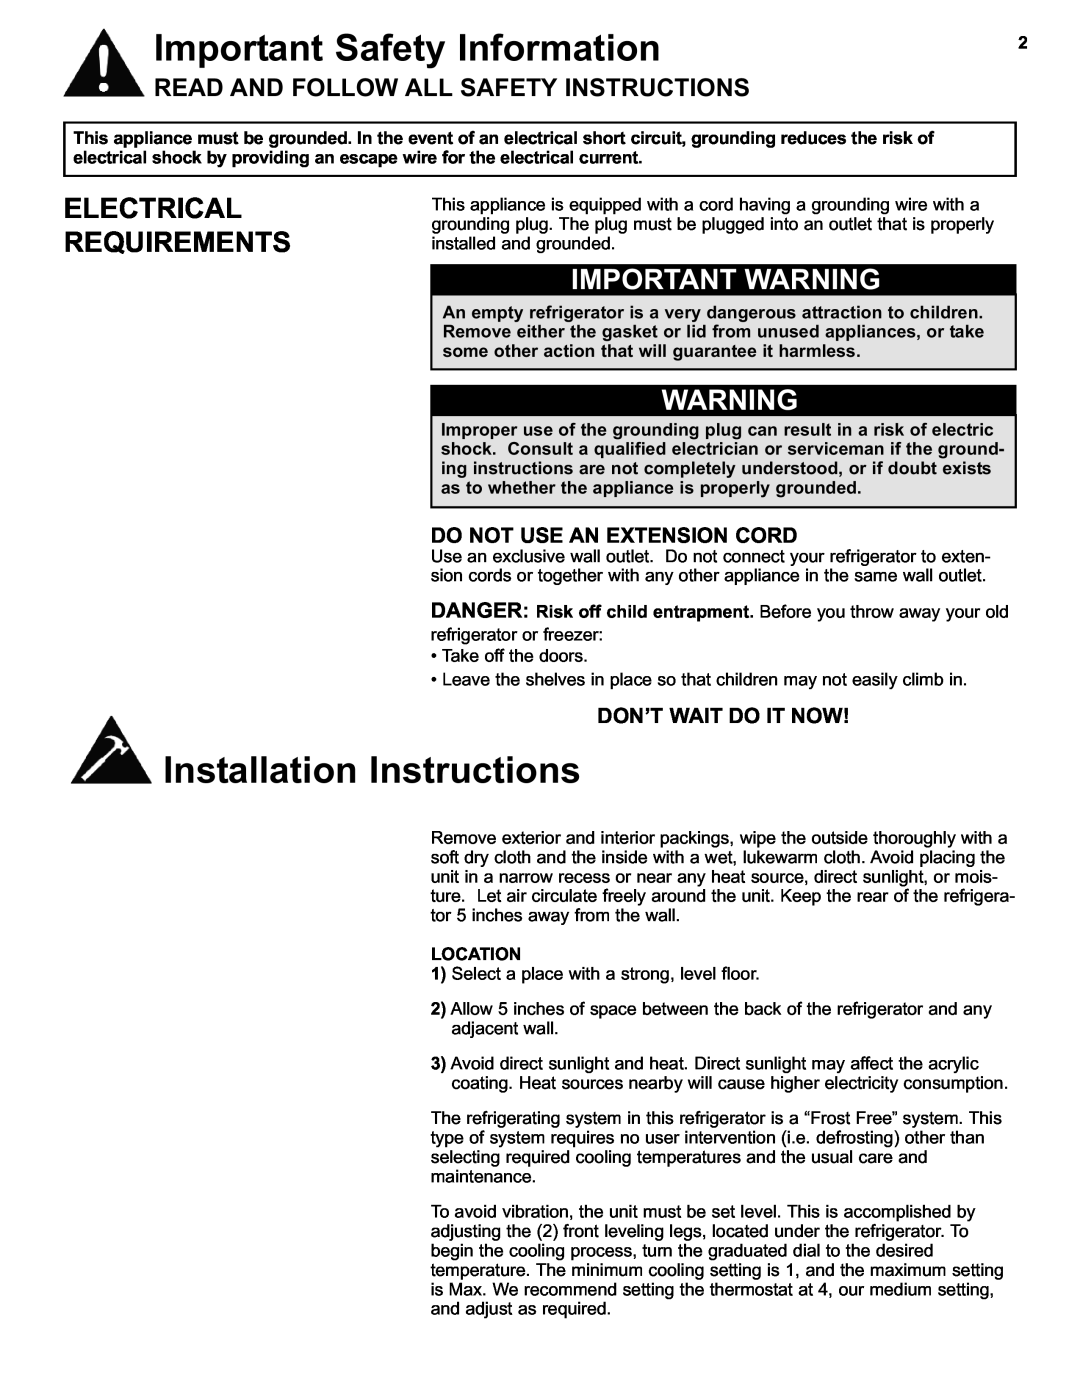 Danby DFF280WDB manual Important Safety Information, Installation Instructions, Electrical Requirements, Important Warning 